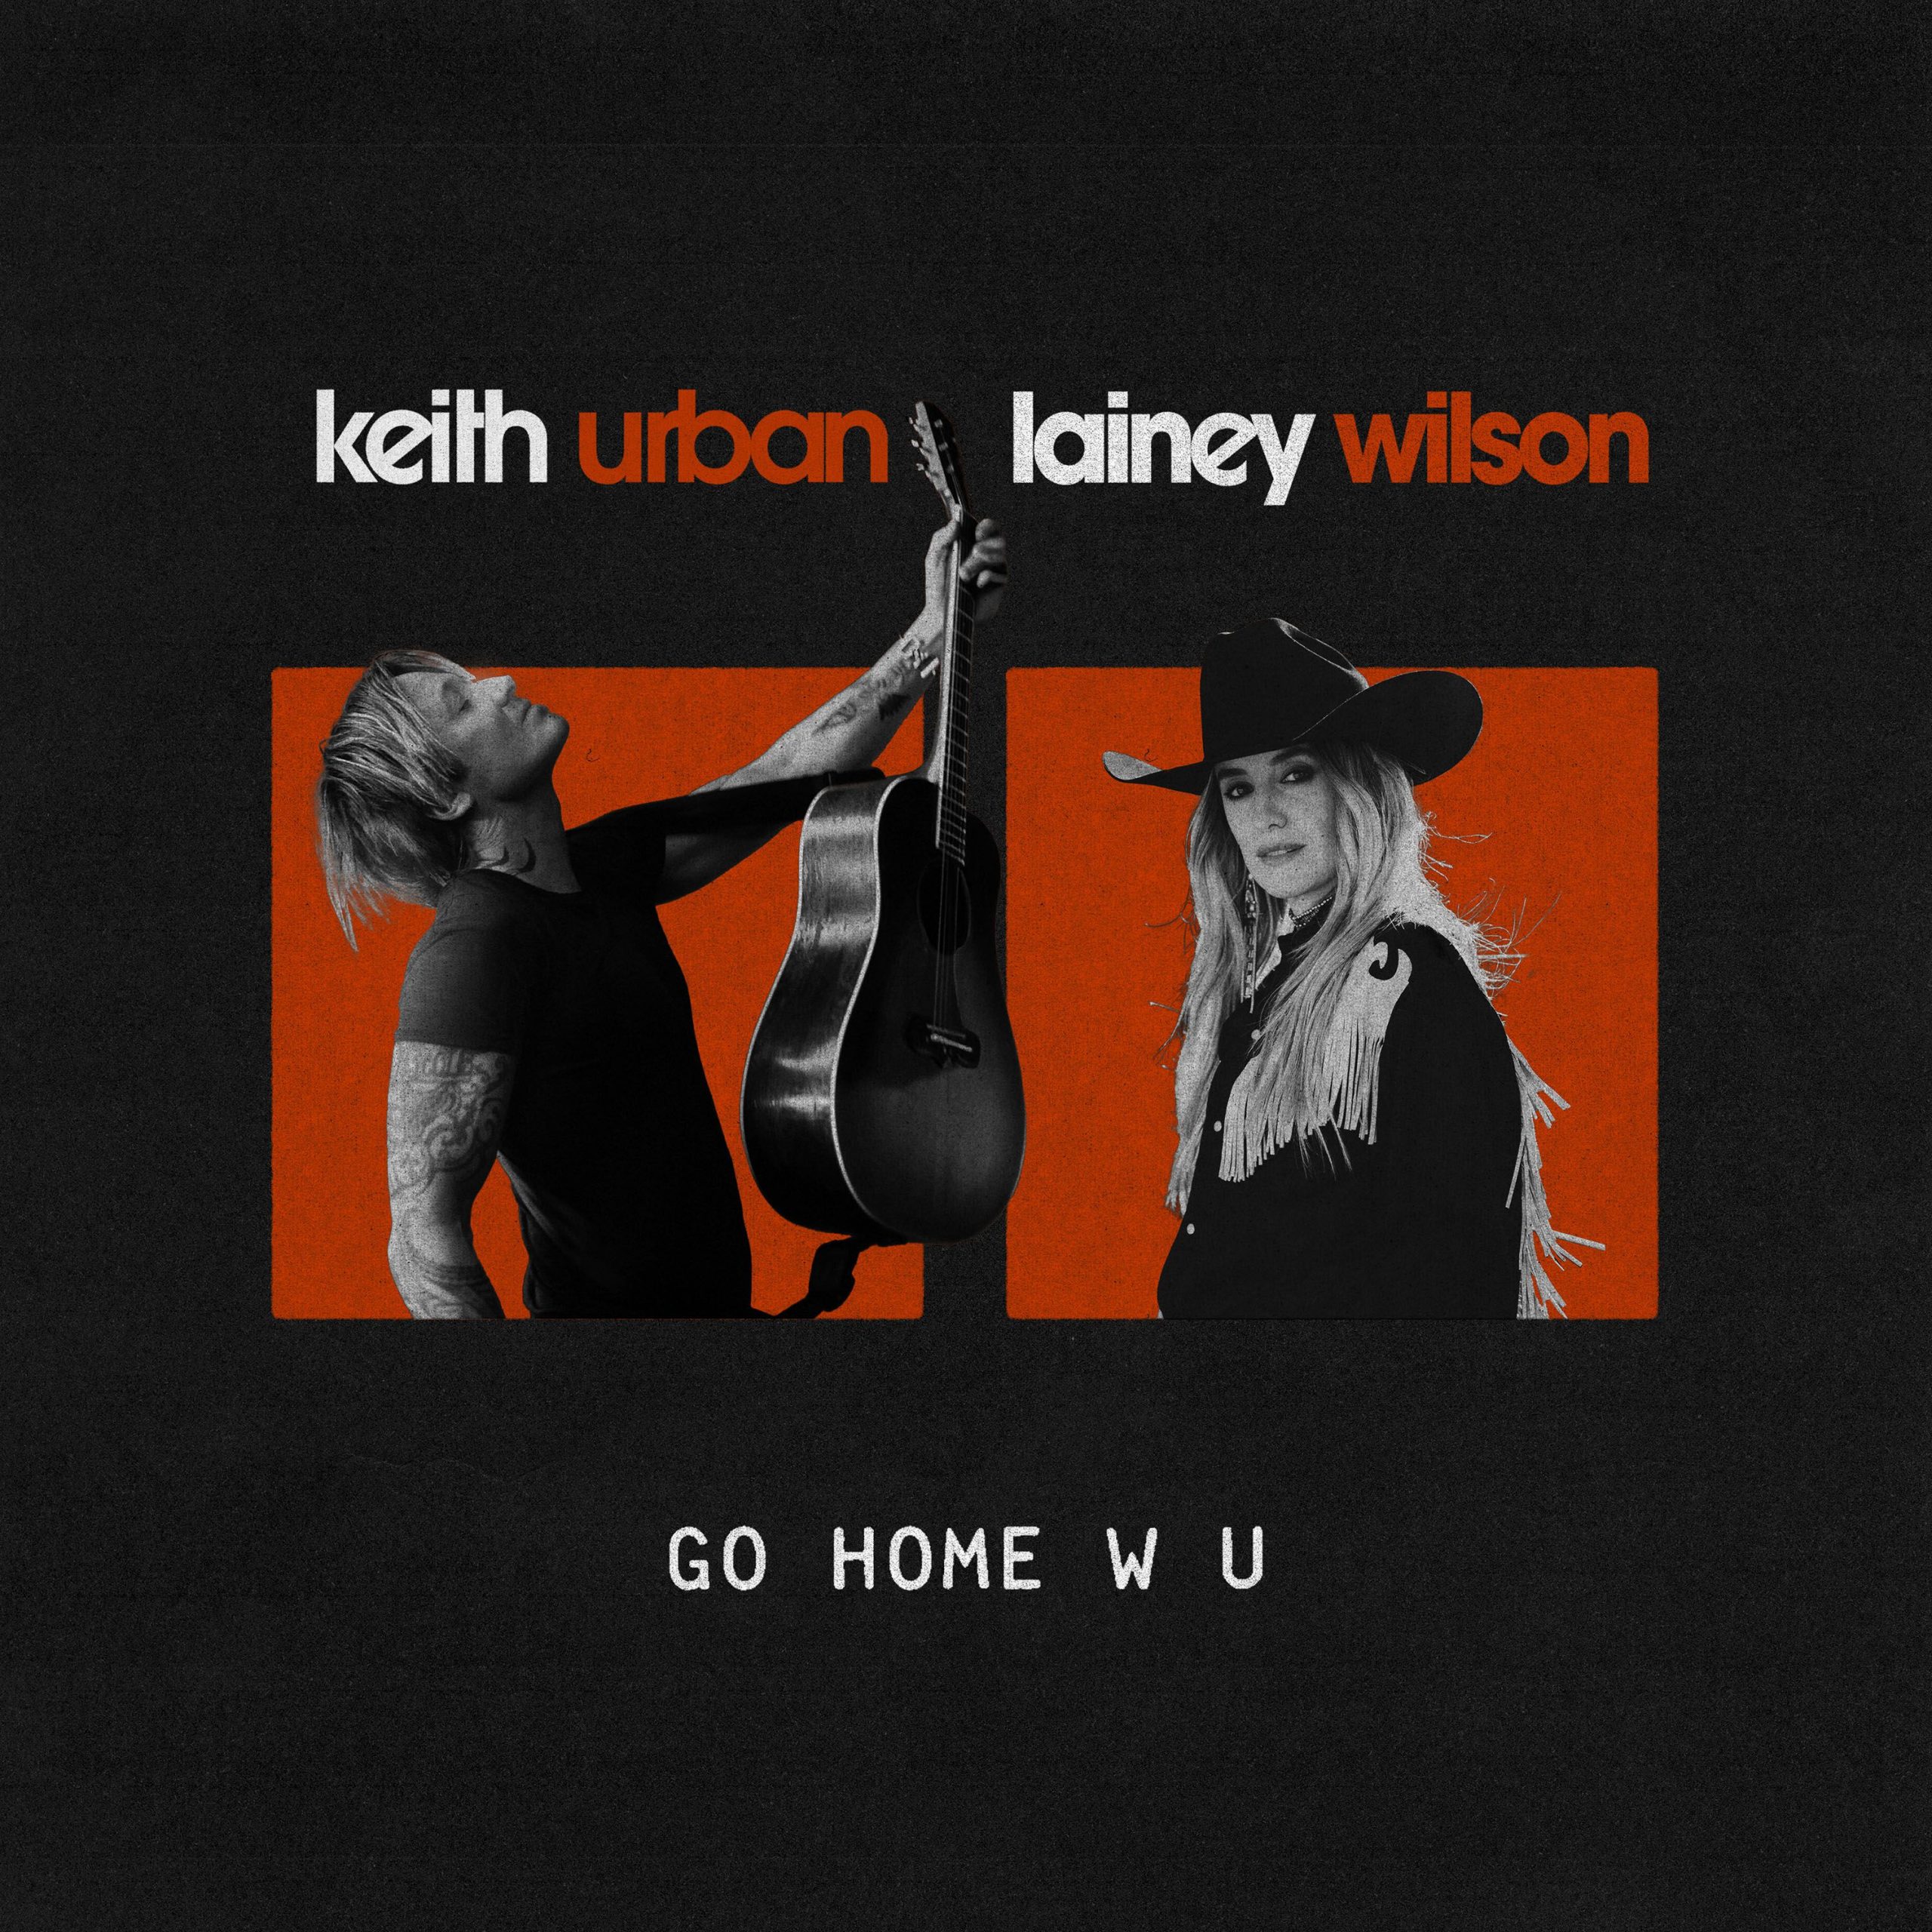 KEITH URBAN RELEASES NEW SONG “GO HOME W U” WITH LAINEY WILSON